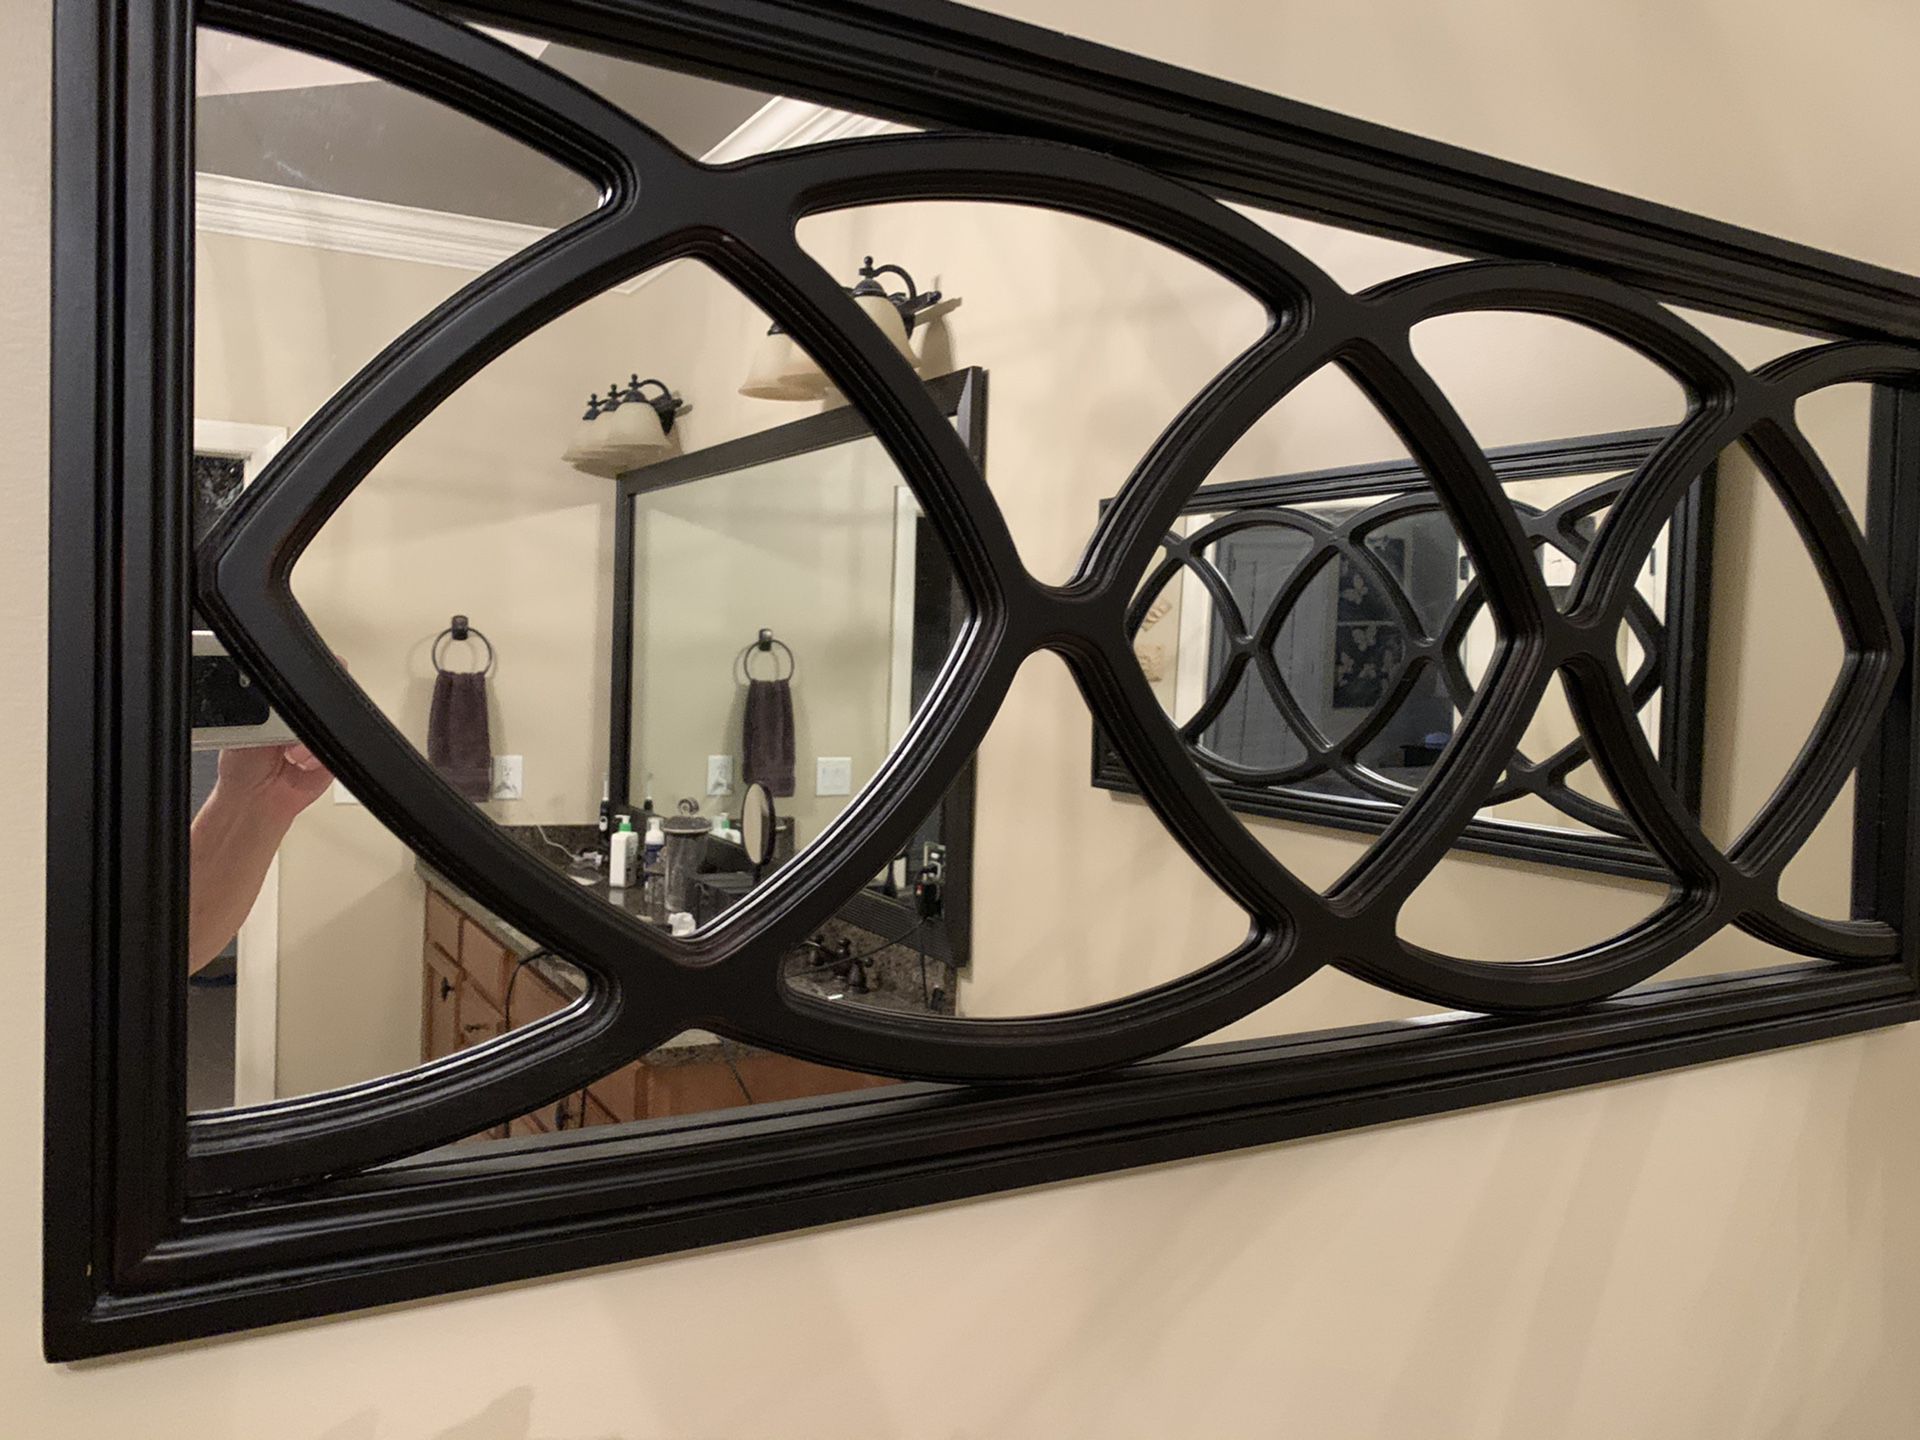 Two Decorative Wall mirrors- brown frame